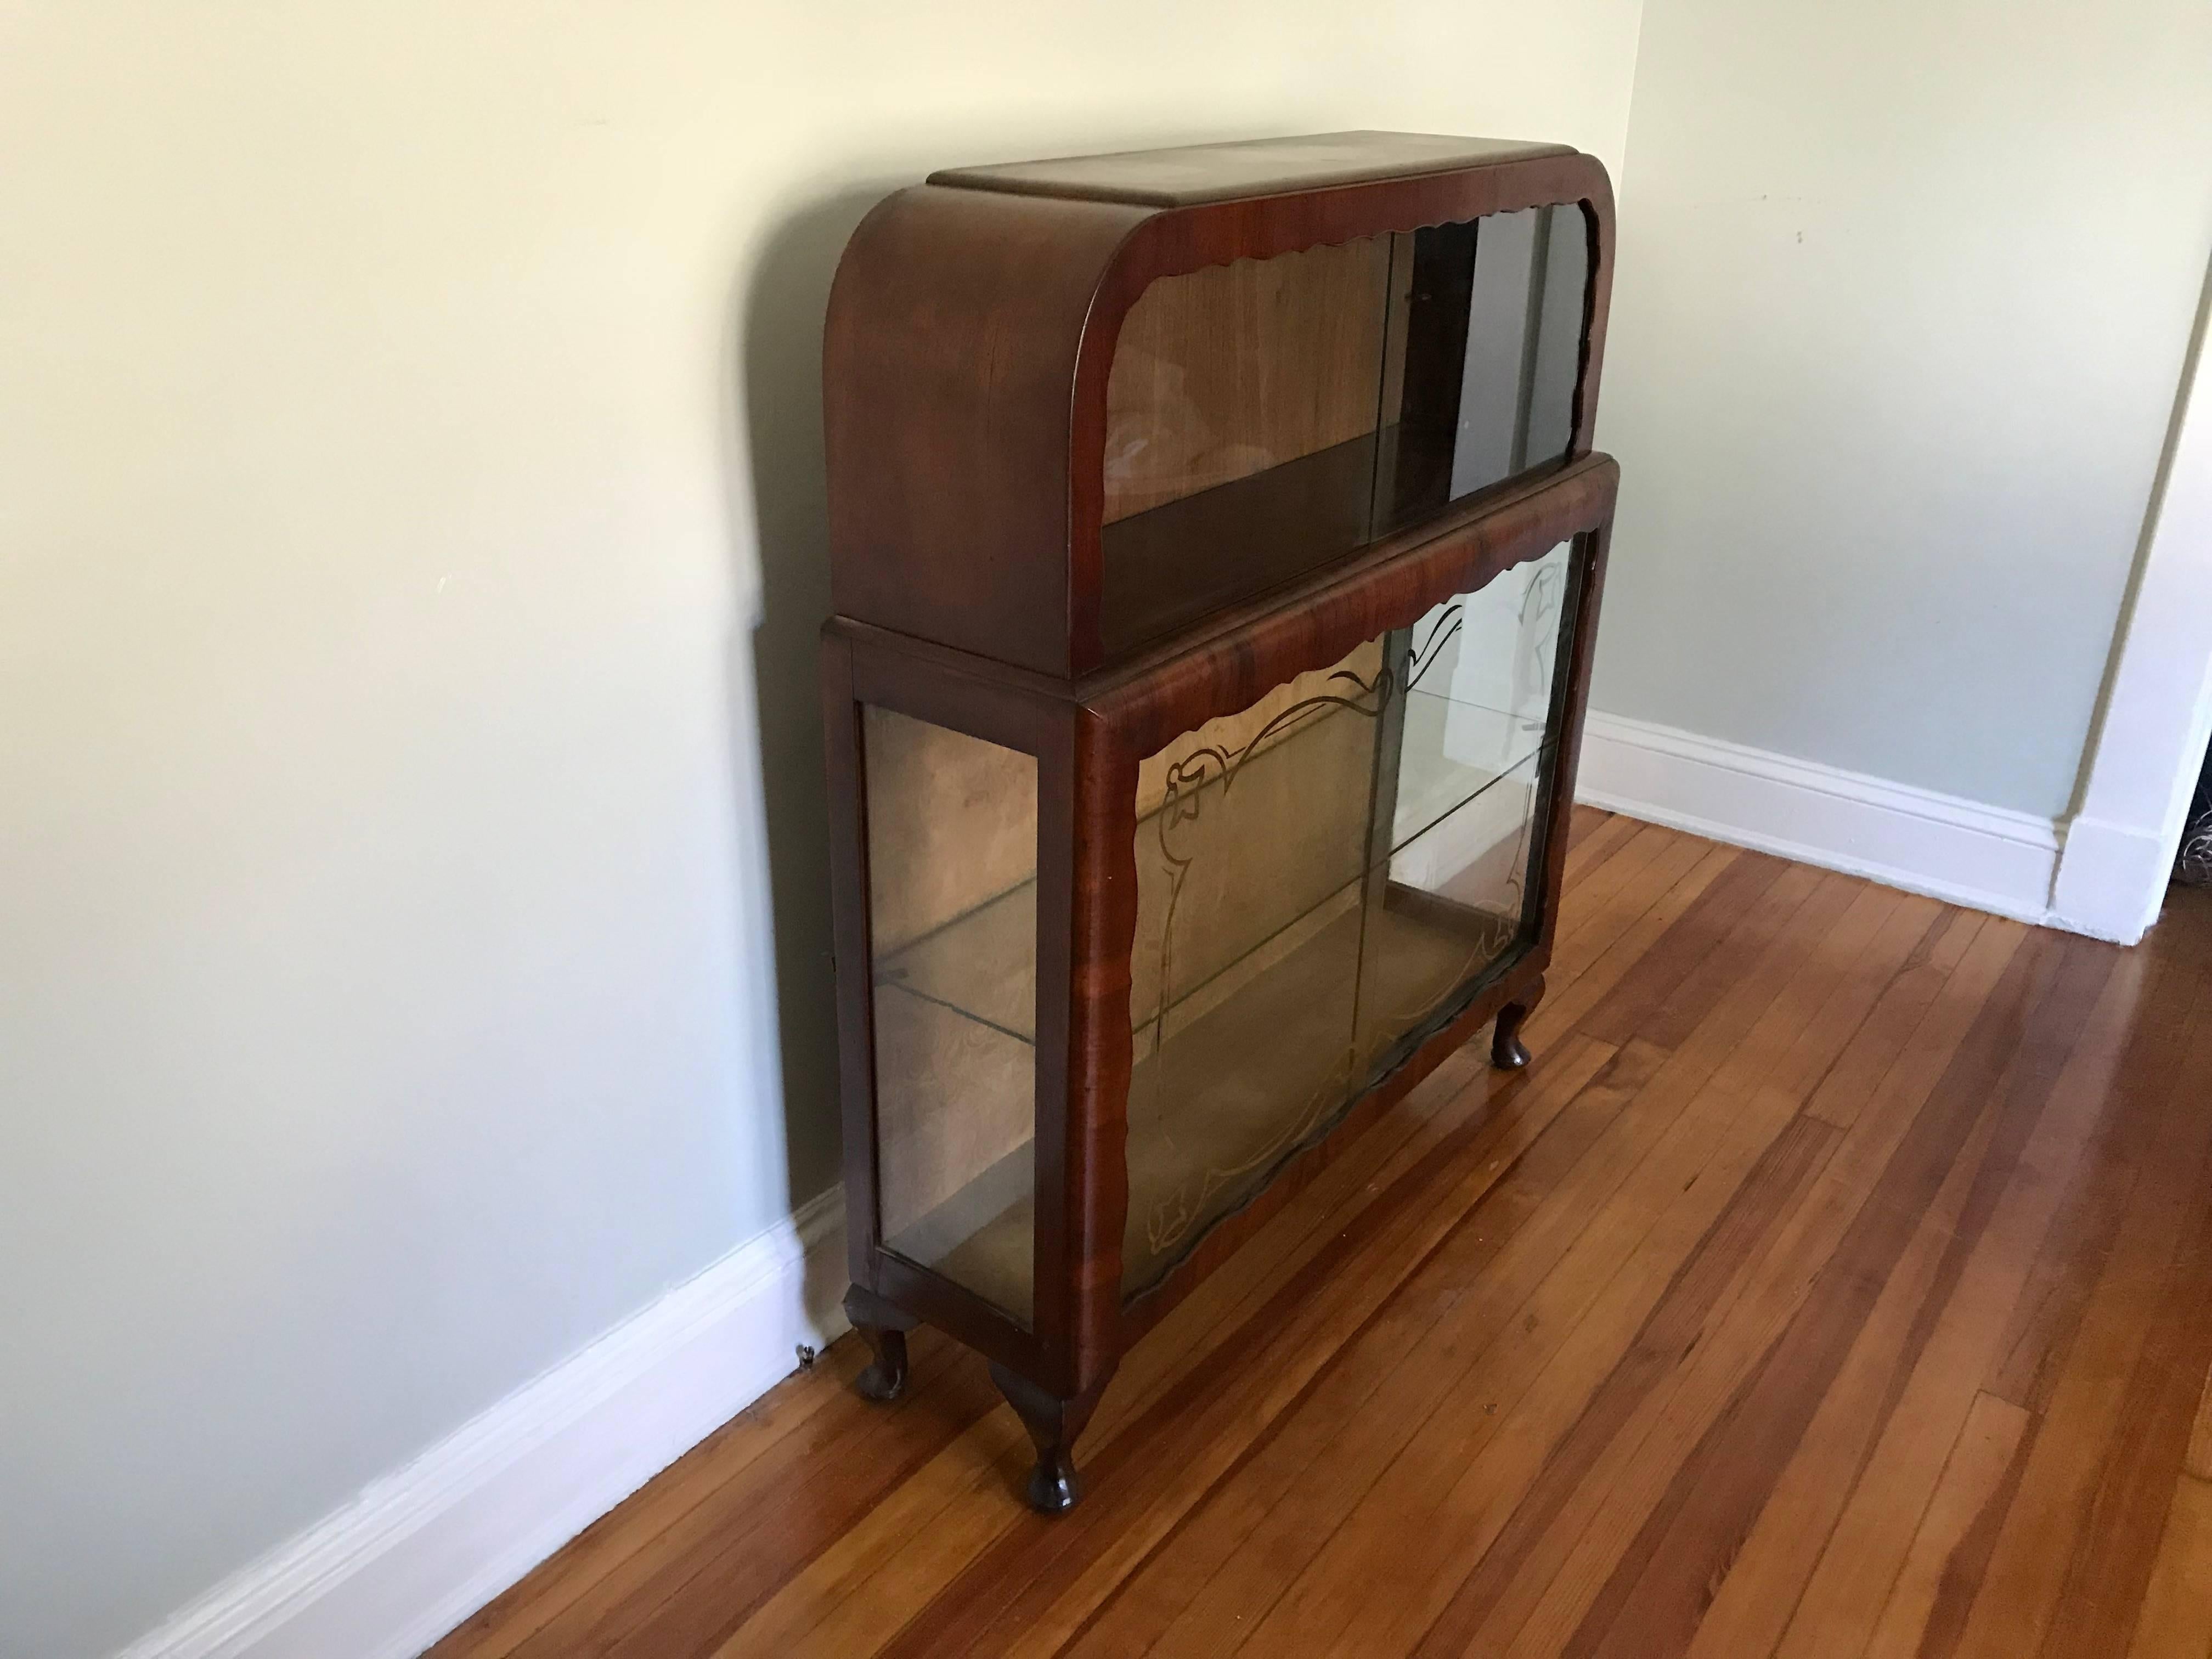 Offered is a gorgeous, 1920s French Art Deco glass-front curio display cabinet. The piece has a stunning, scalloped woodwork detailing, framing the sliding glass doors. The doors have a beautiful, silver-leaf stencil work around the edges.